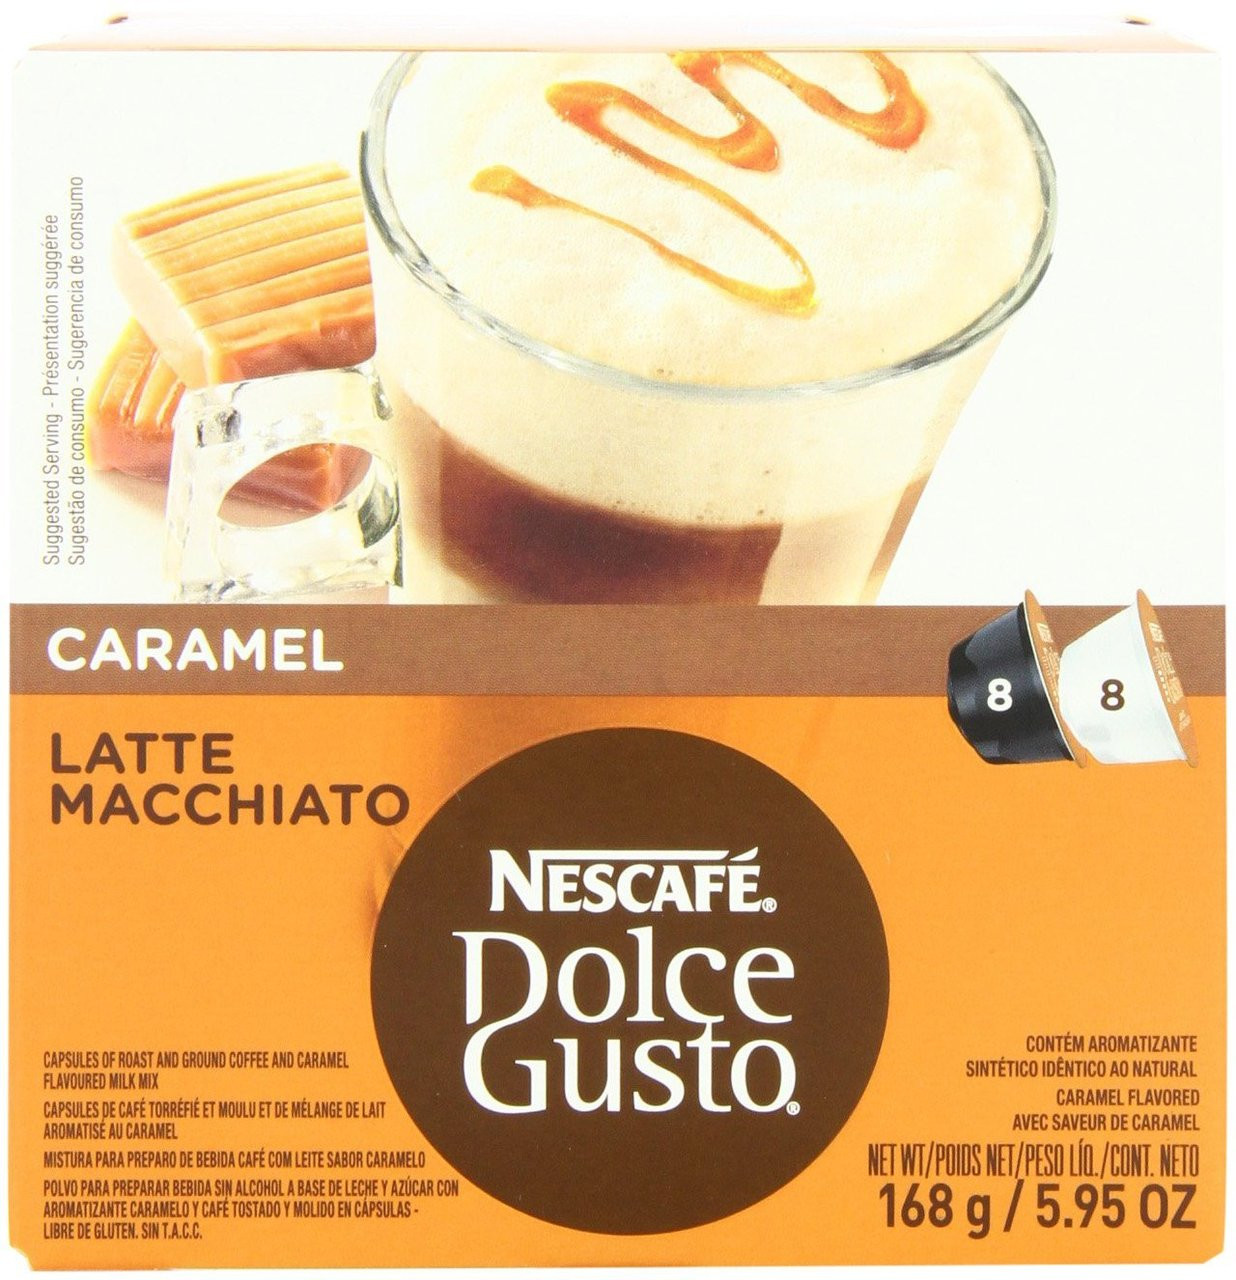 Nescafe Dolce Gusto for Nescafe Dolce Gusto Brewers, Caramel Latte  Macchiato, 16 Count (Pack of 3)